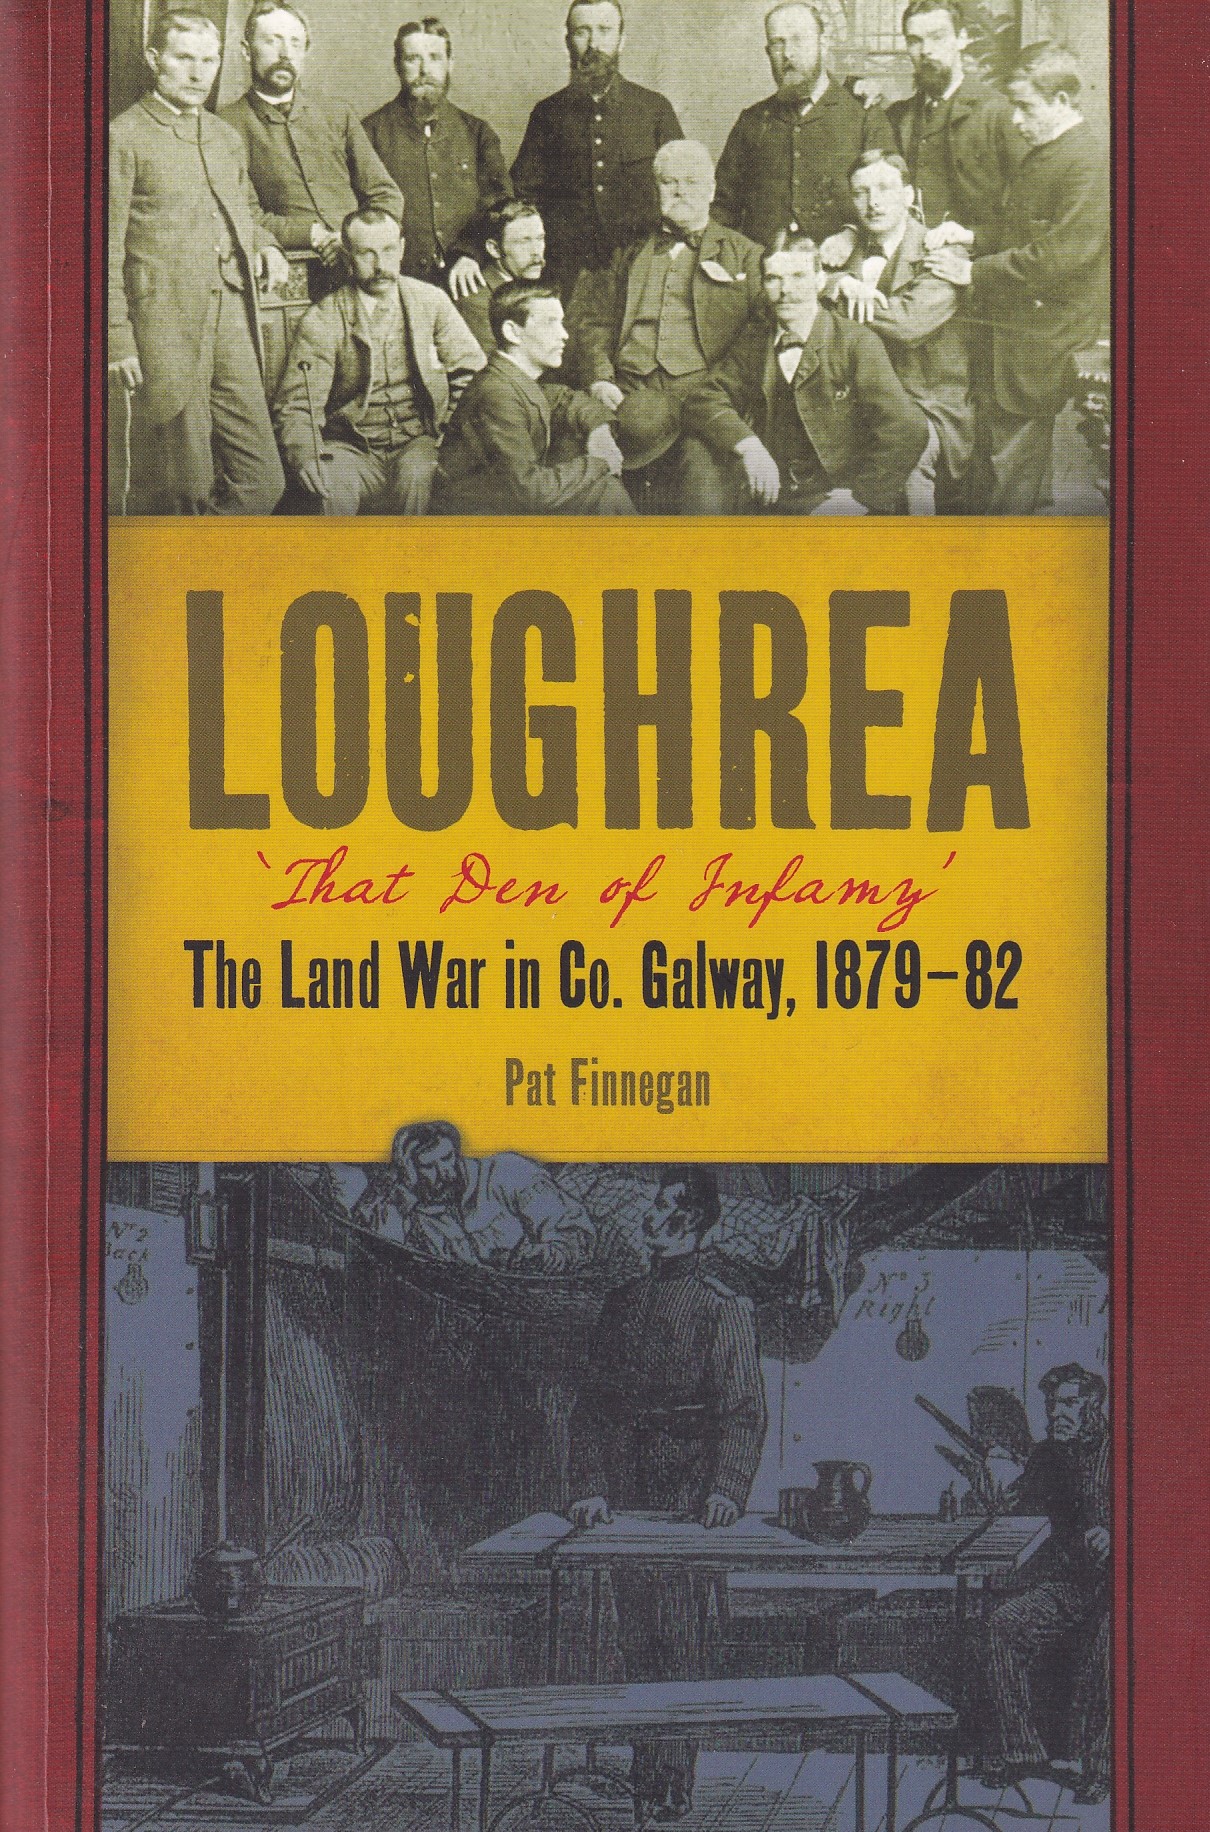 Loughrea, That Den of Infamy: The Land War in County Galway, 1879-82 [SIGNED] by Pat Finnegan